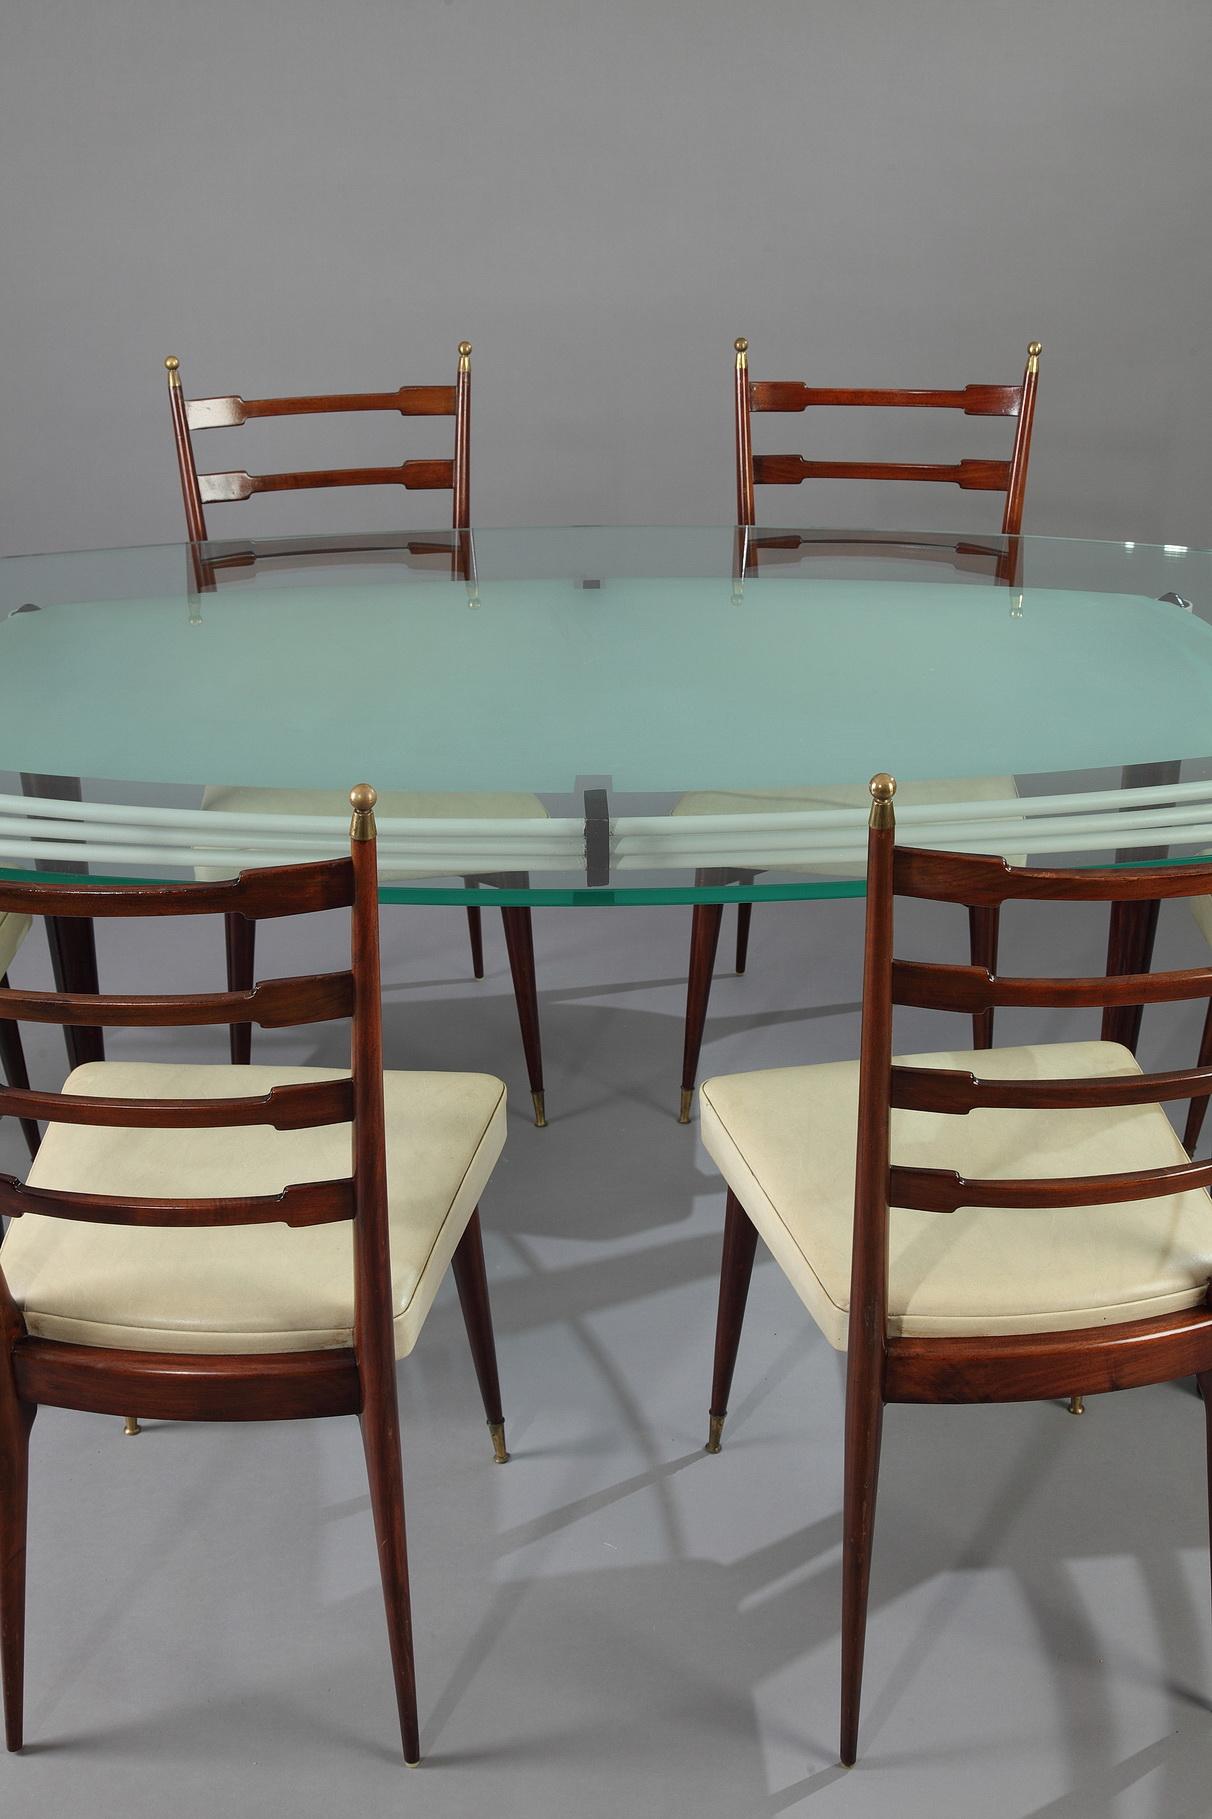 White lacquered metal table with glass top resting on four slender oak feet. 1960s Italian design. Six chairs in mahogany and leather imitation decorated with brass finials, 

circa 1960
Dimensions table: L 188 cm, P 116 cm, H 78 cm.
Dimensions